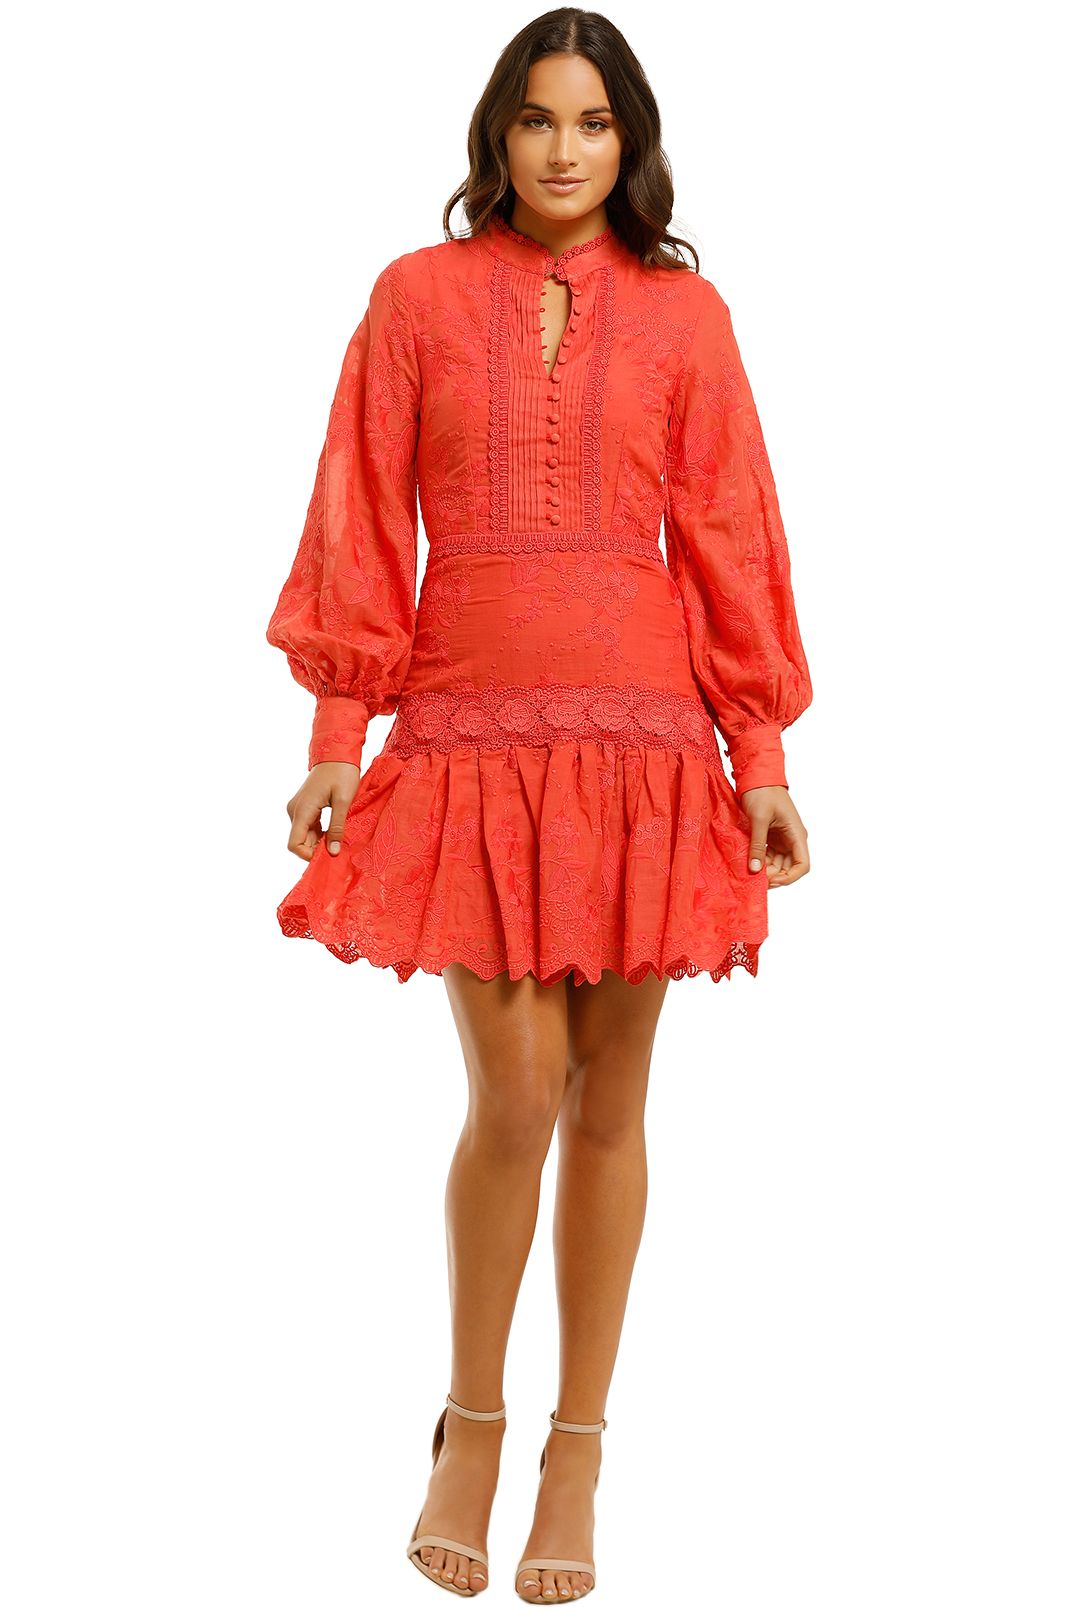 Ministry-of-Style-Daphne-Mini-Dress-Coral-Front